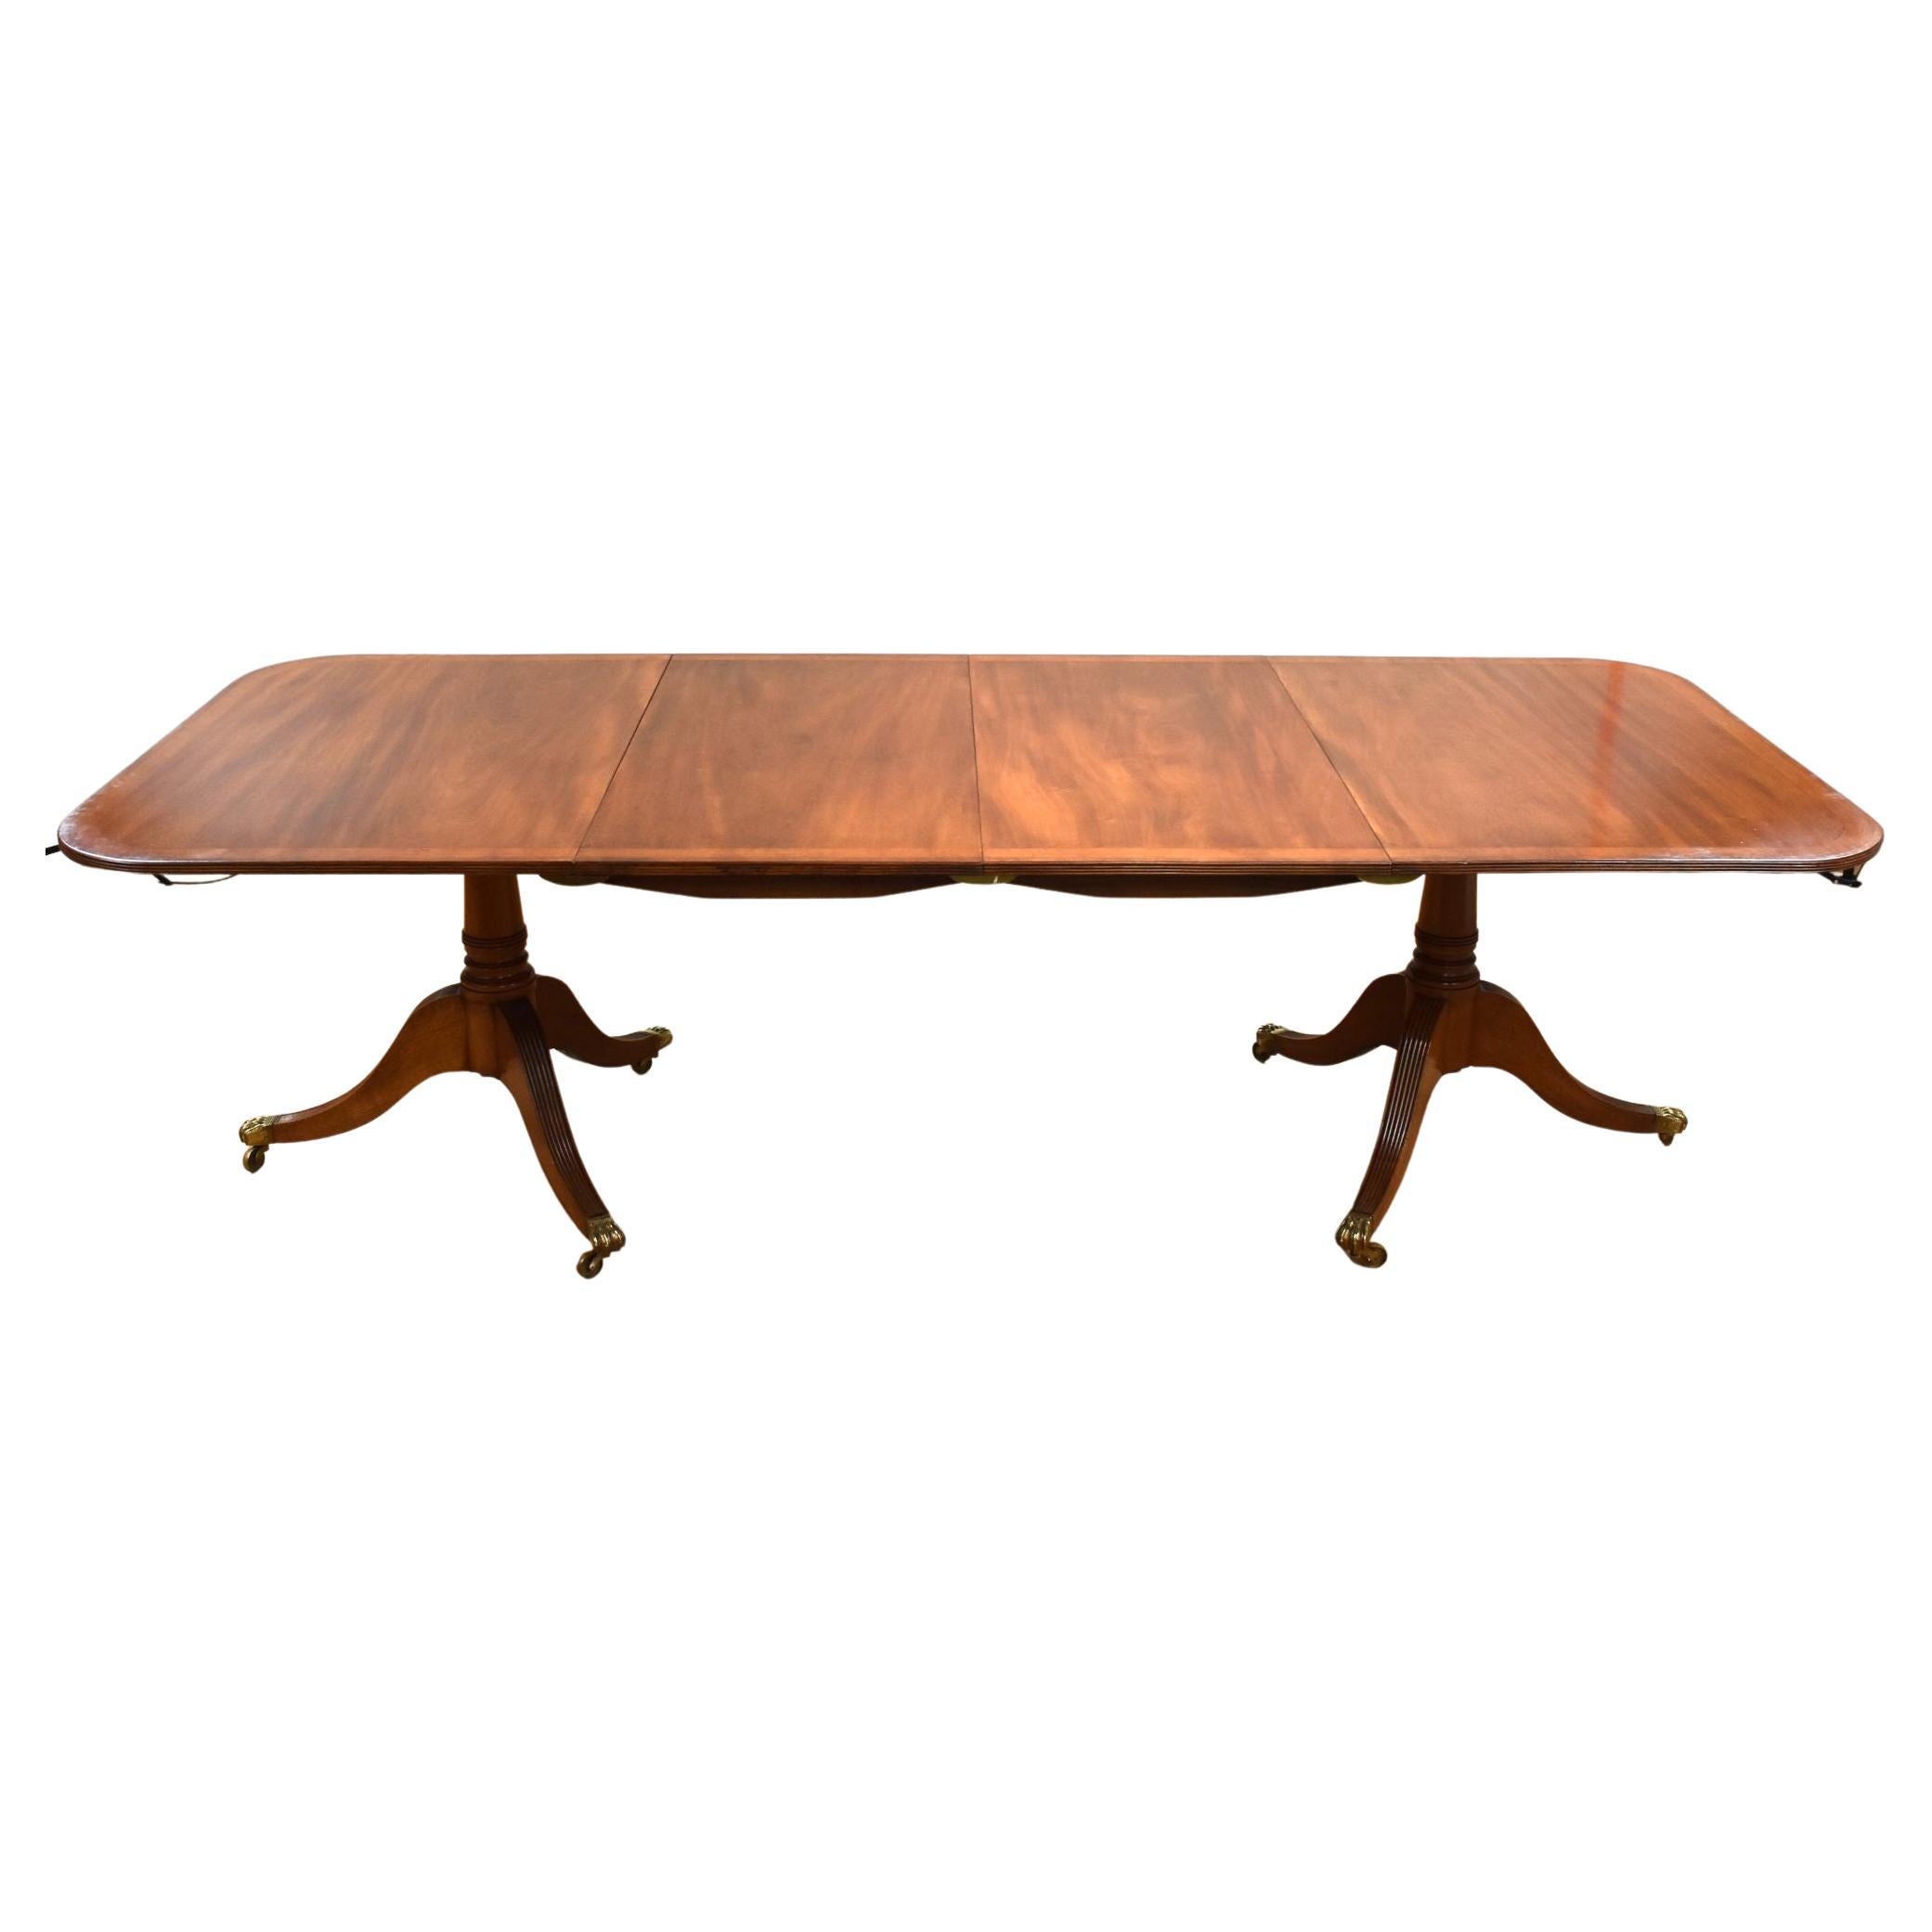 Antique Solid Mahogany Pedestal Dining Table